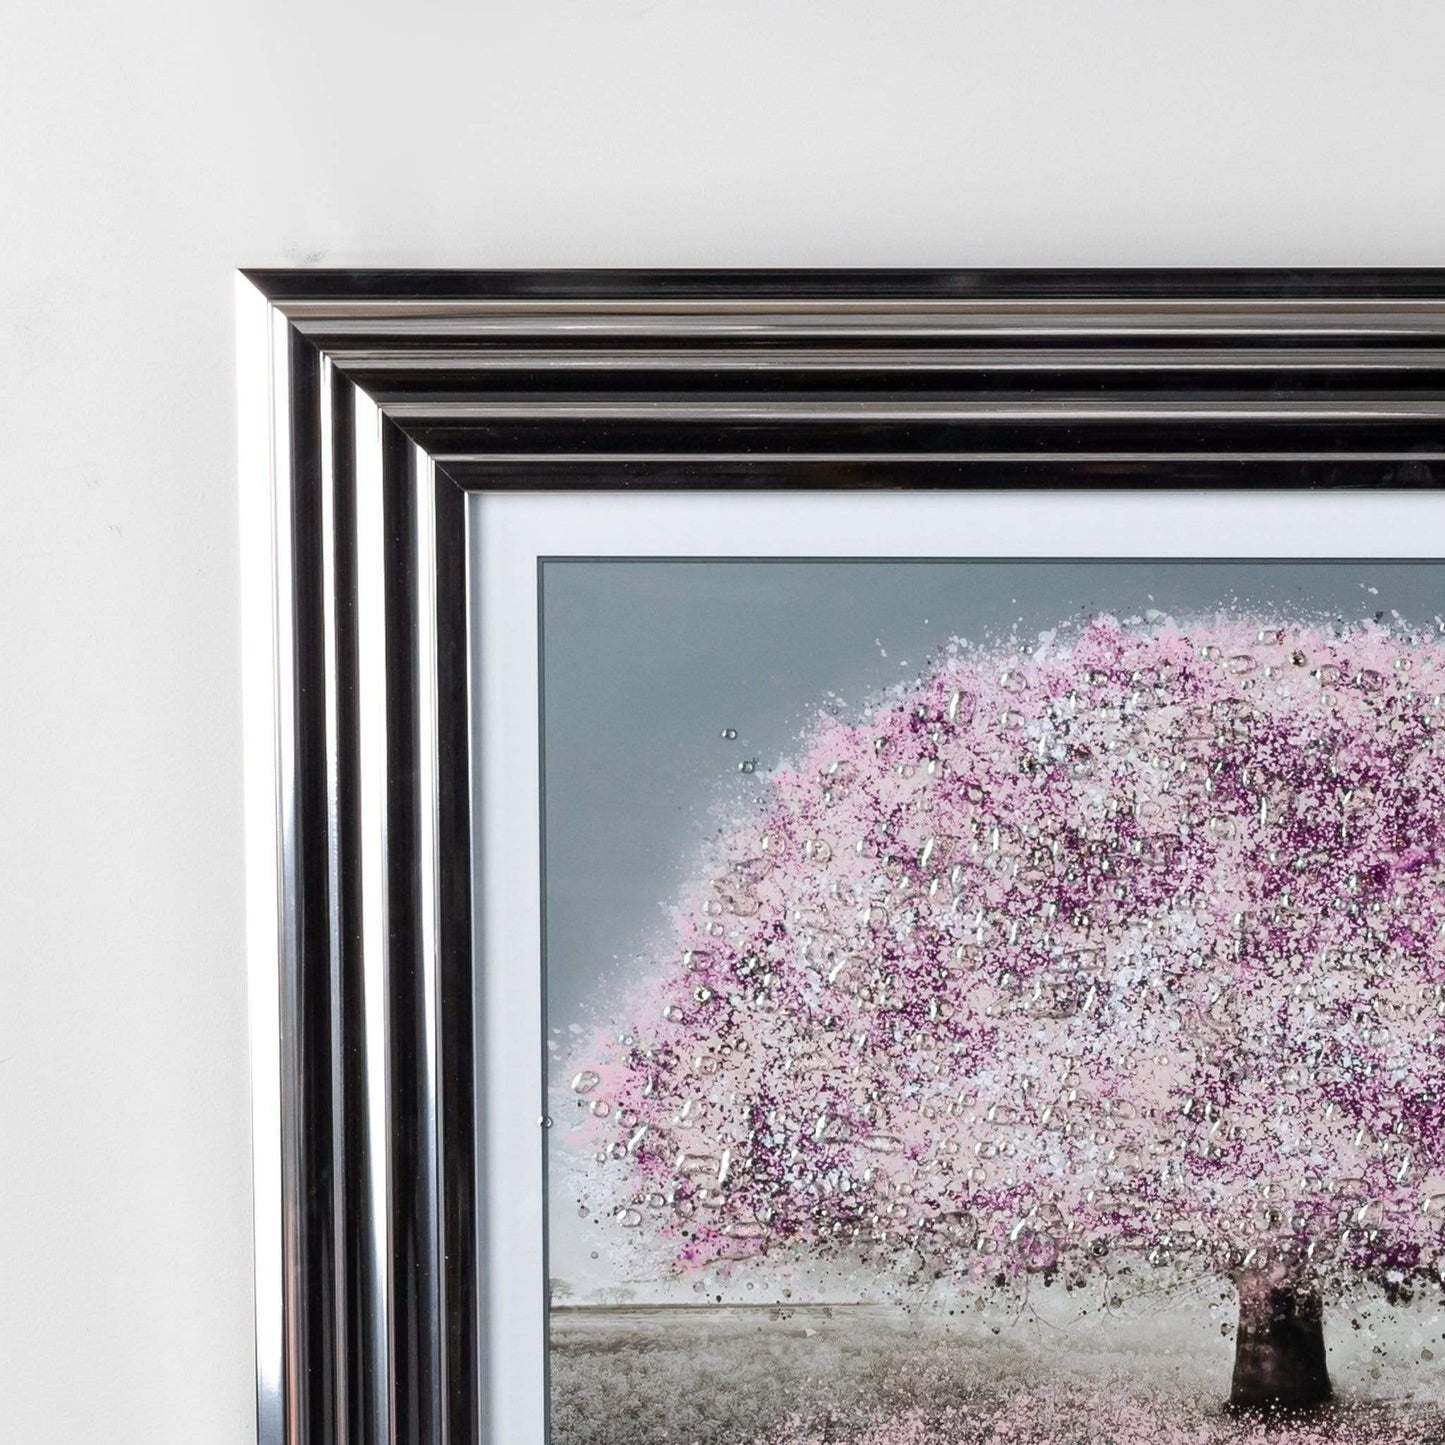 Pictures  -  Shh Blush Blossom Tree Framed Picture 55 X 75  -  50147142